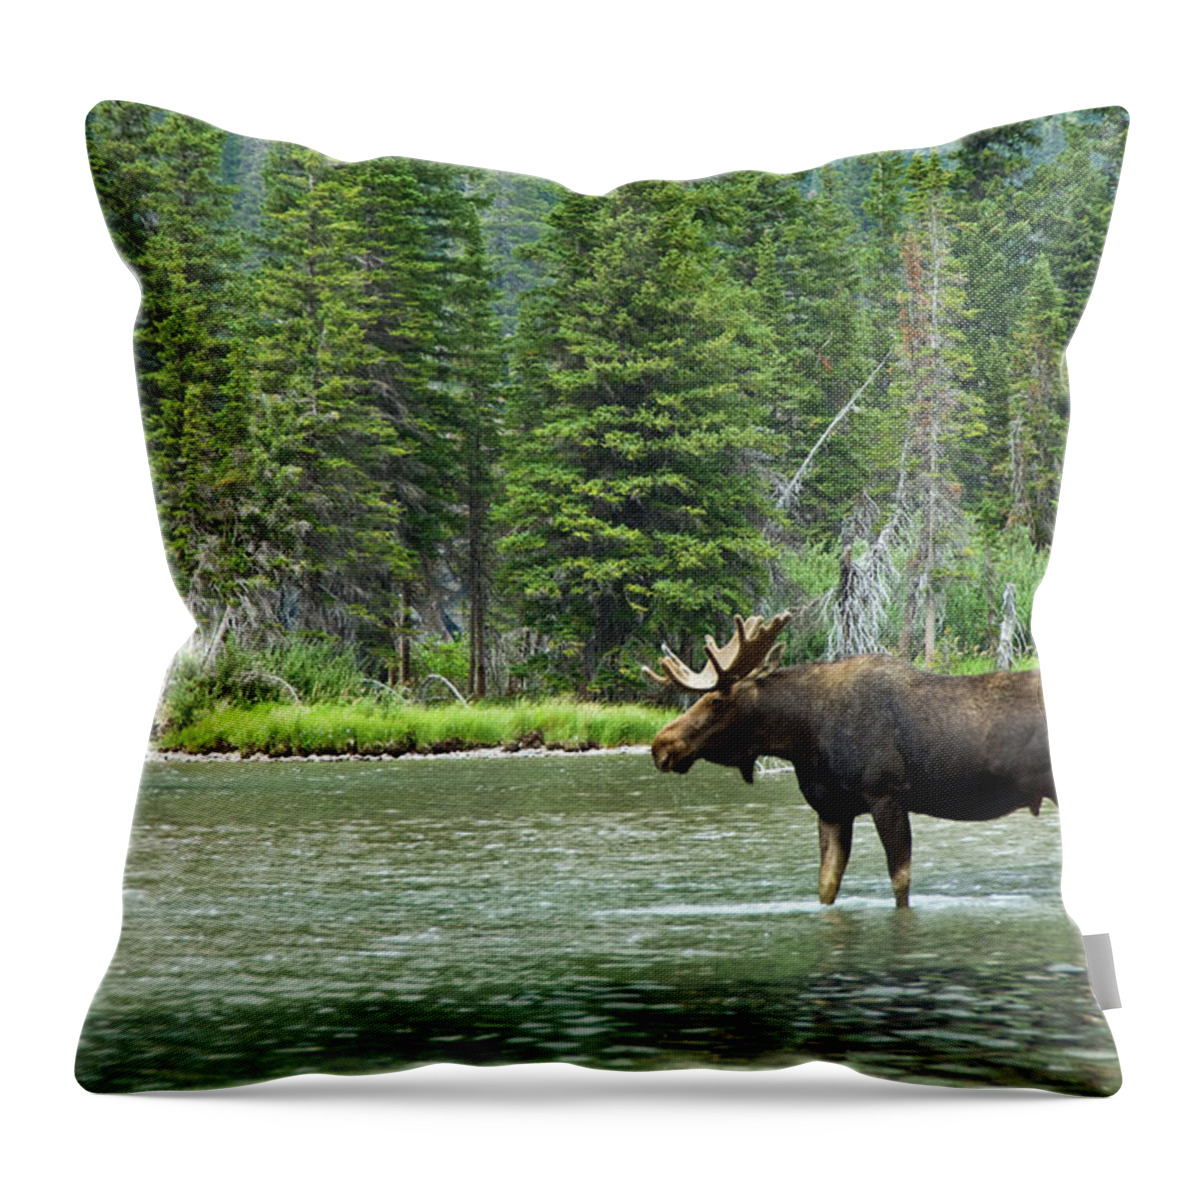 Non-urban Scene Throw Pillow featuring the photograph Moose Alces Alces, Montana, Usa by Mike Hill